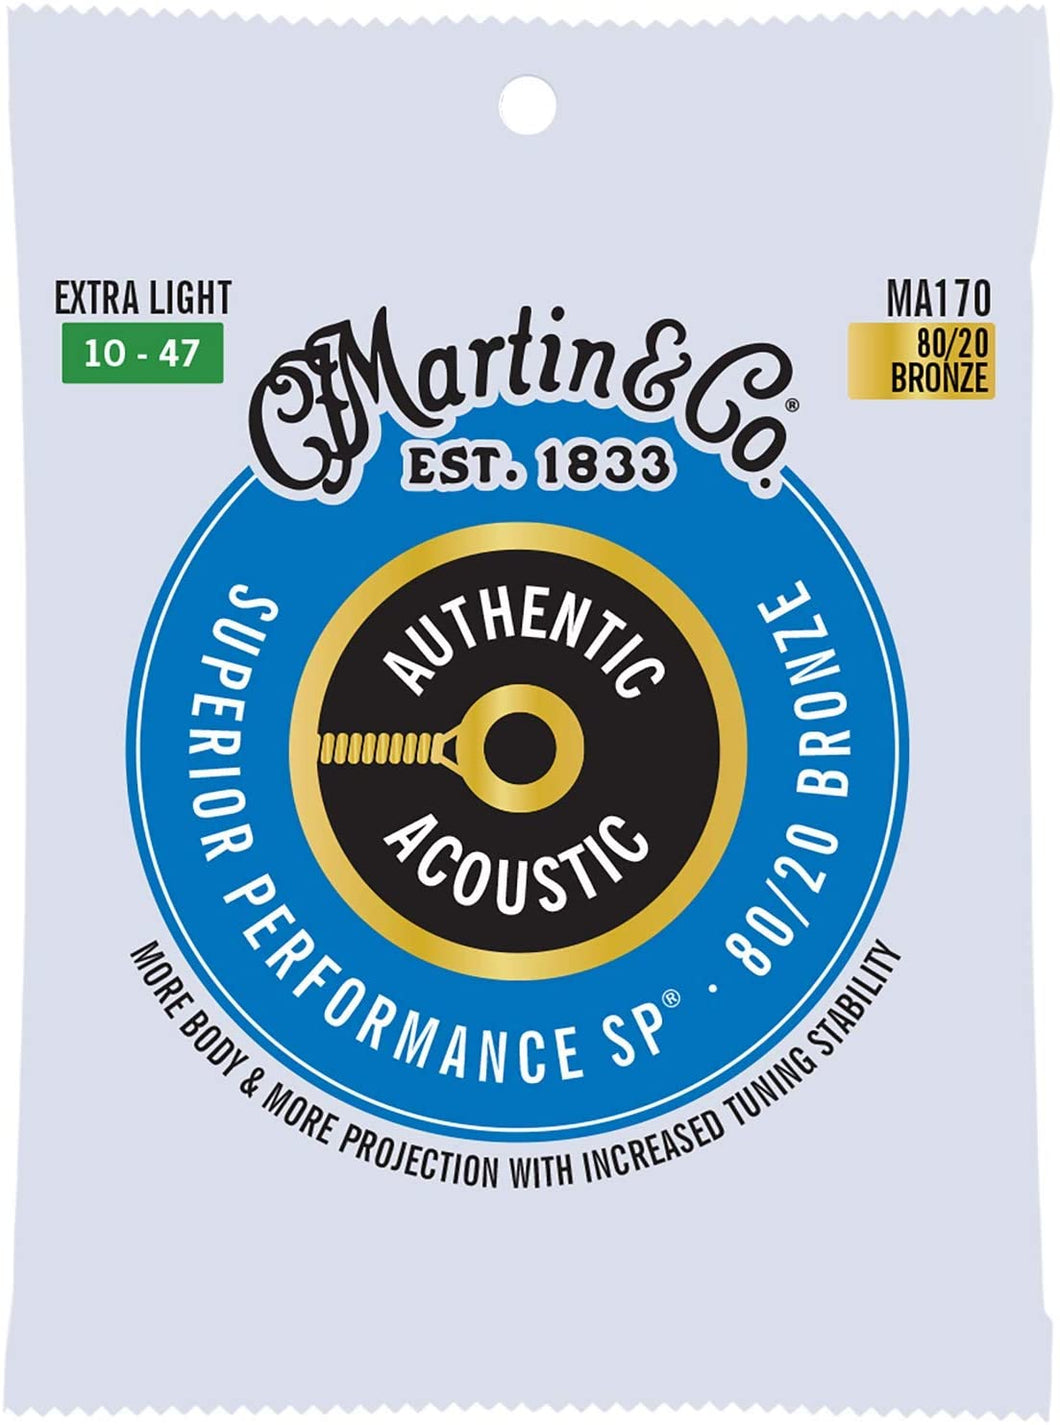 MARTIN MA170 EXTRA LIGHT 10 - 47 BRONZE 80/20 AUTHENTIC ACOUSTIC SUPERIOR PERFORMANCE SP® GUITAR STRINGS